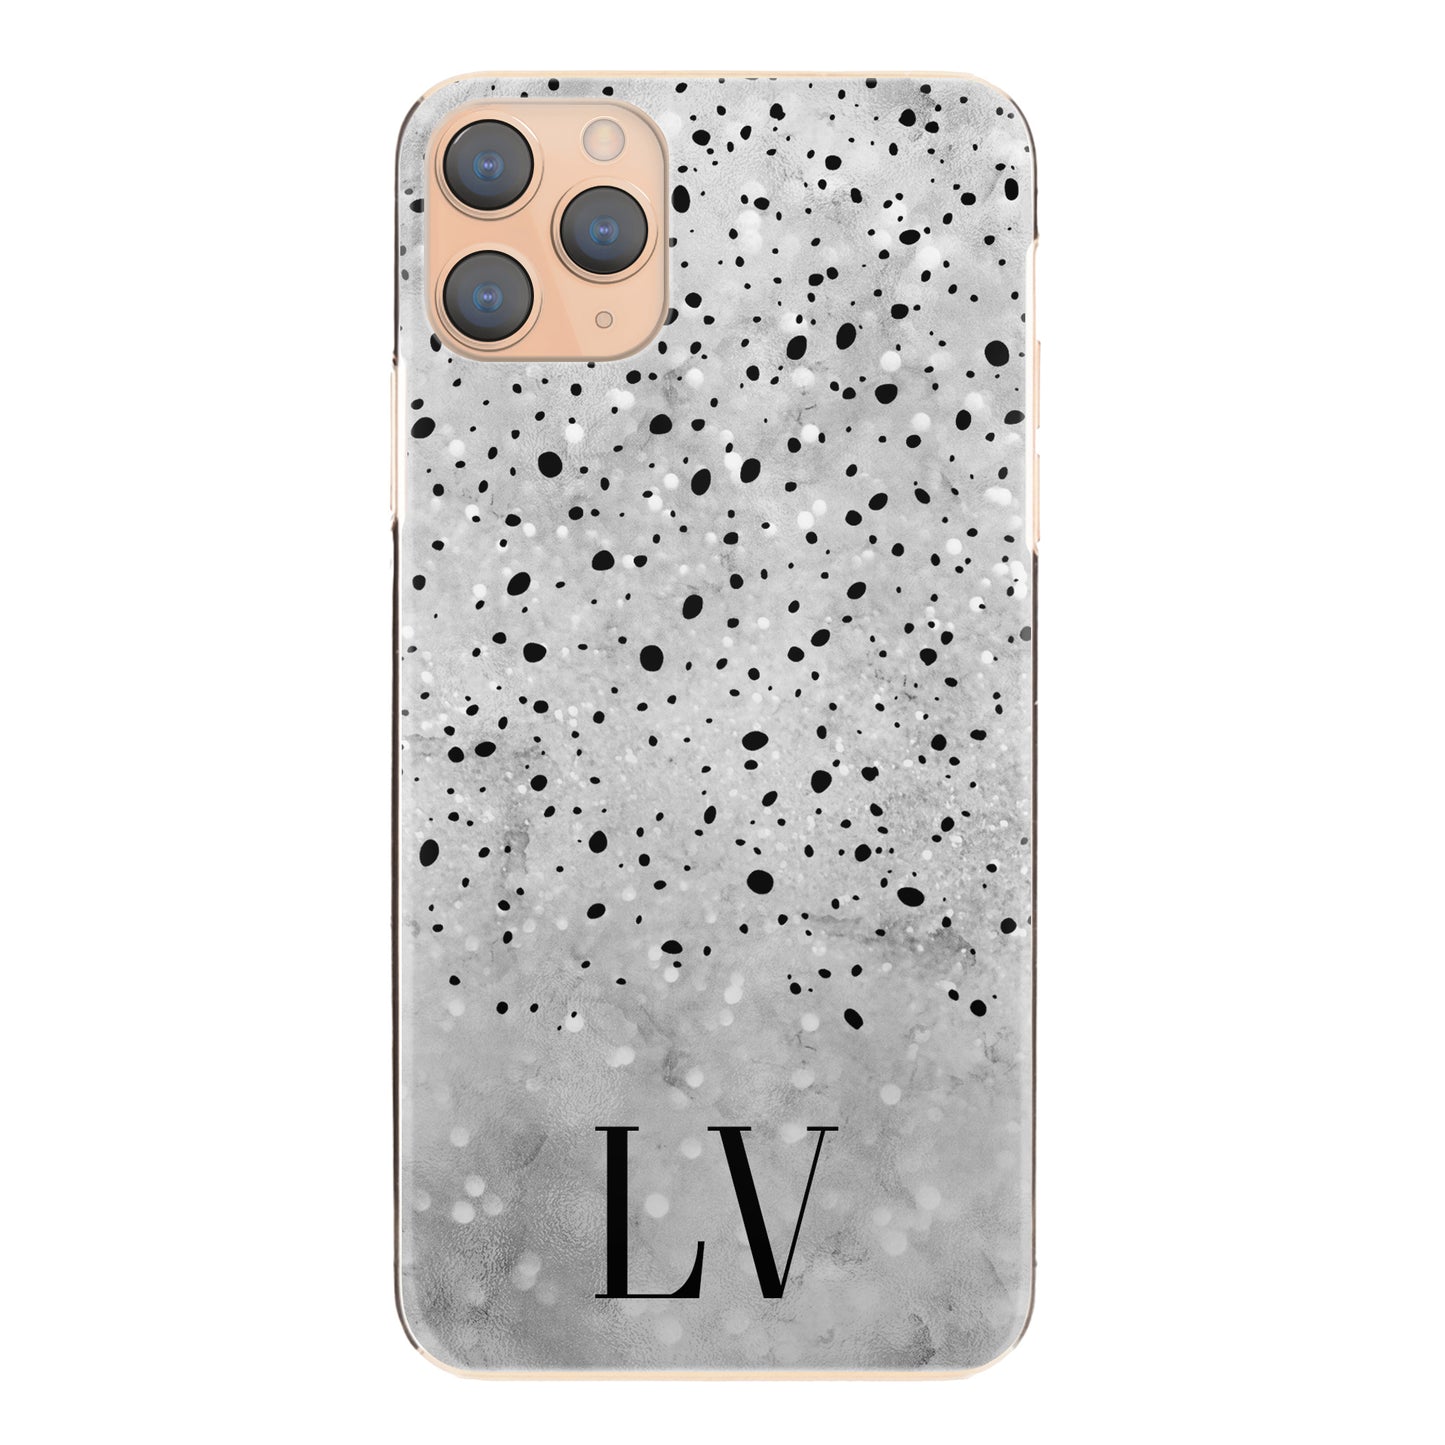 Personalised Sony Phone Hard Case with Classy Initials on Textured Grey and Black Dots